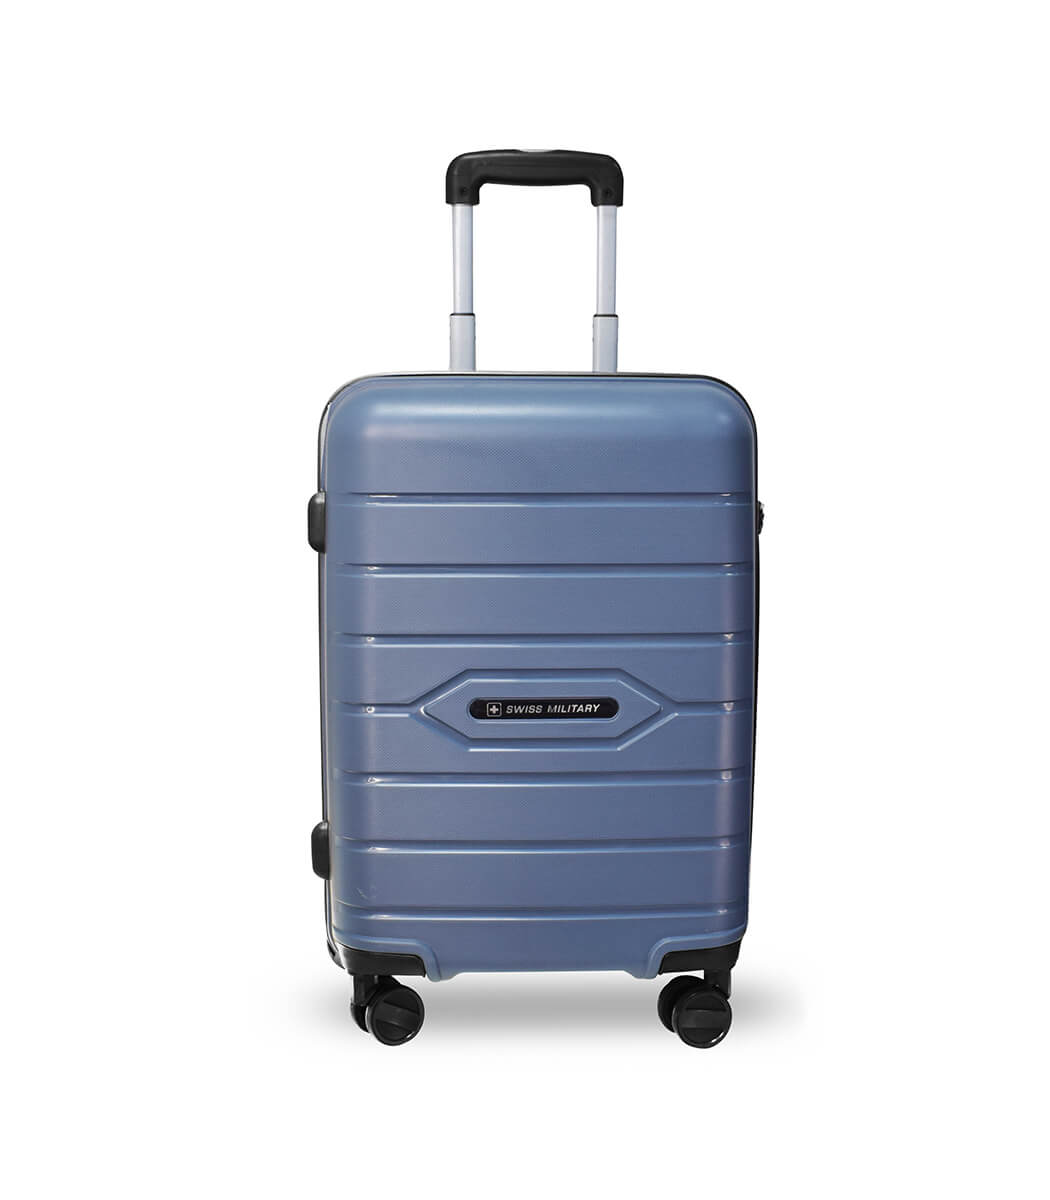 HTL83  20inch Hard Trolley Luggage  SWISS MILITARY CONSUMER GOODS LIMITED